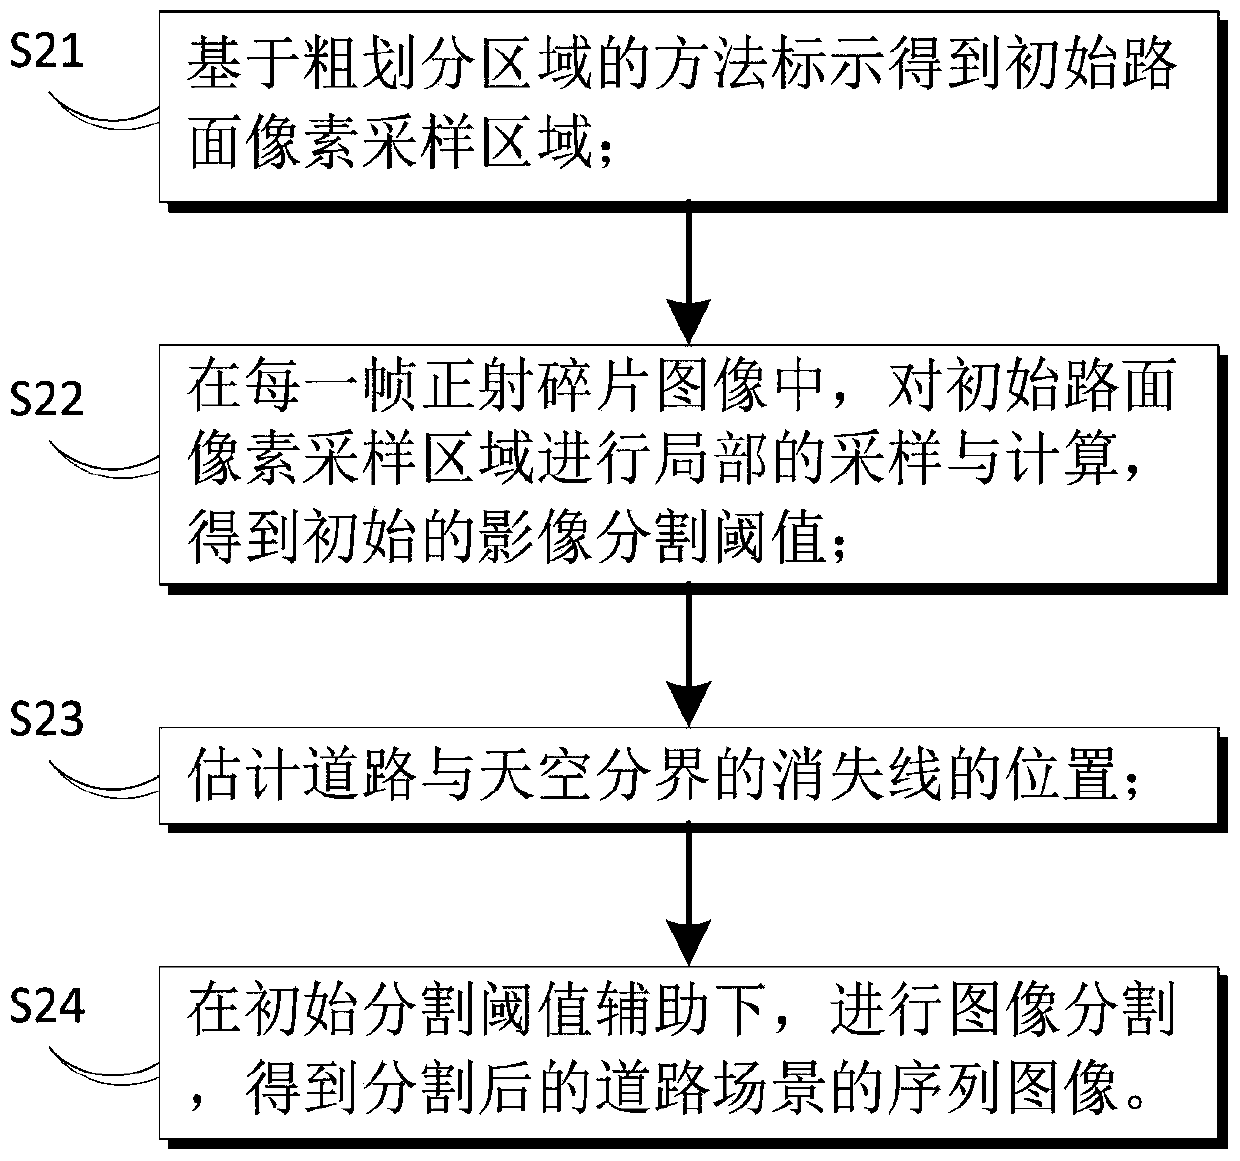 Road marking extraction method based on forward camera in automatic driving